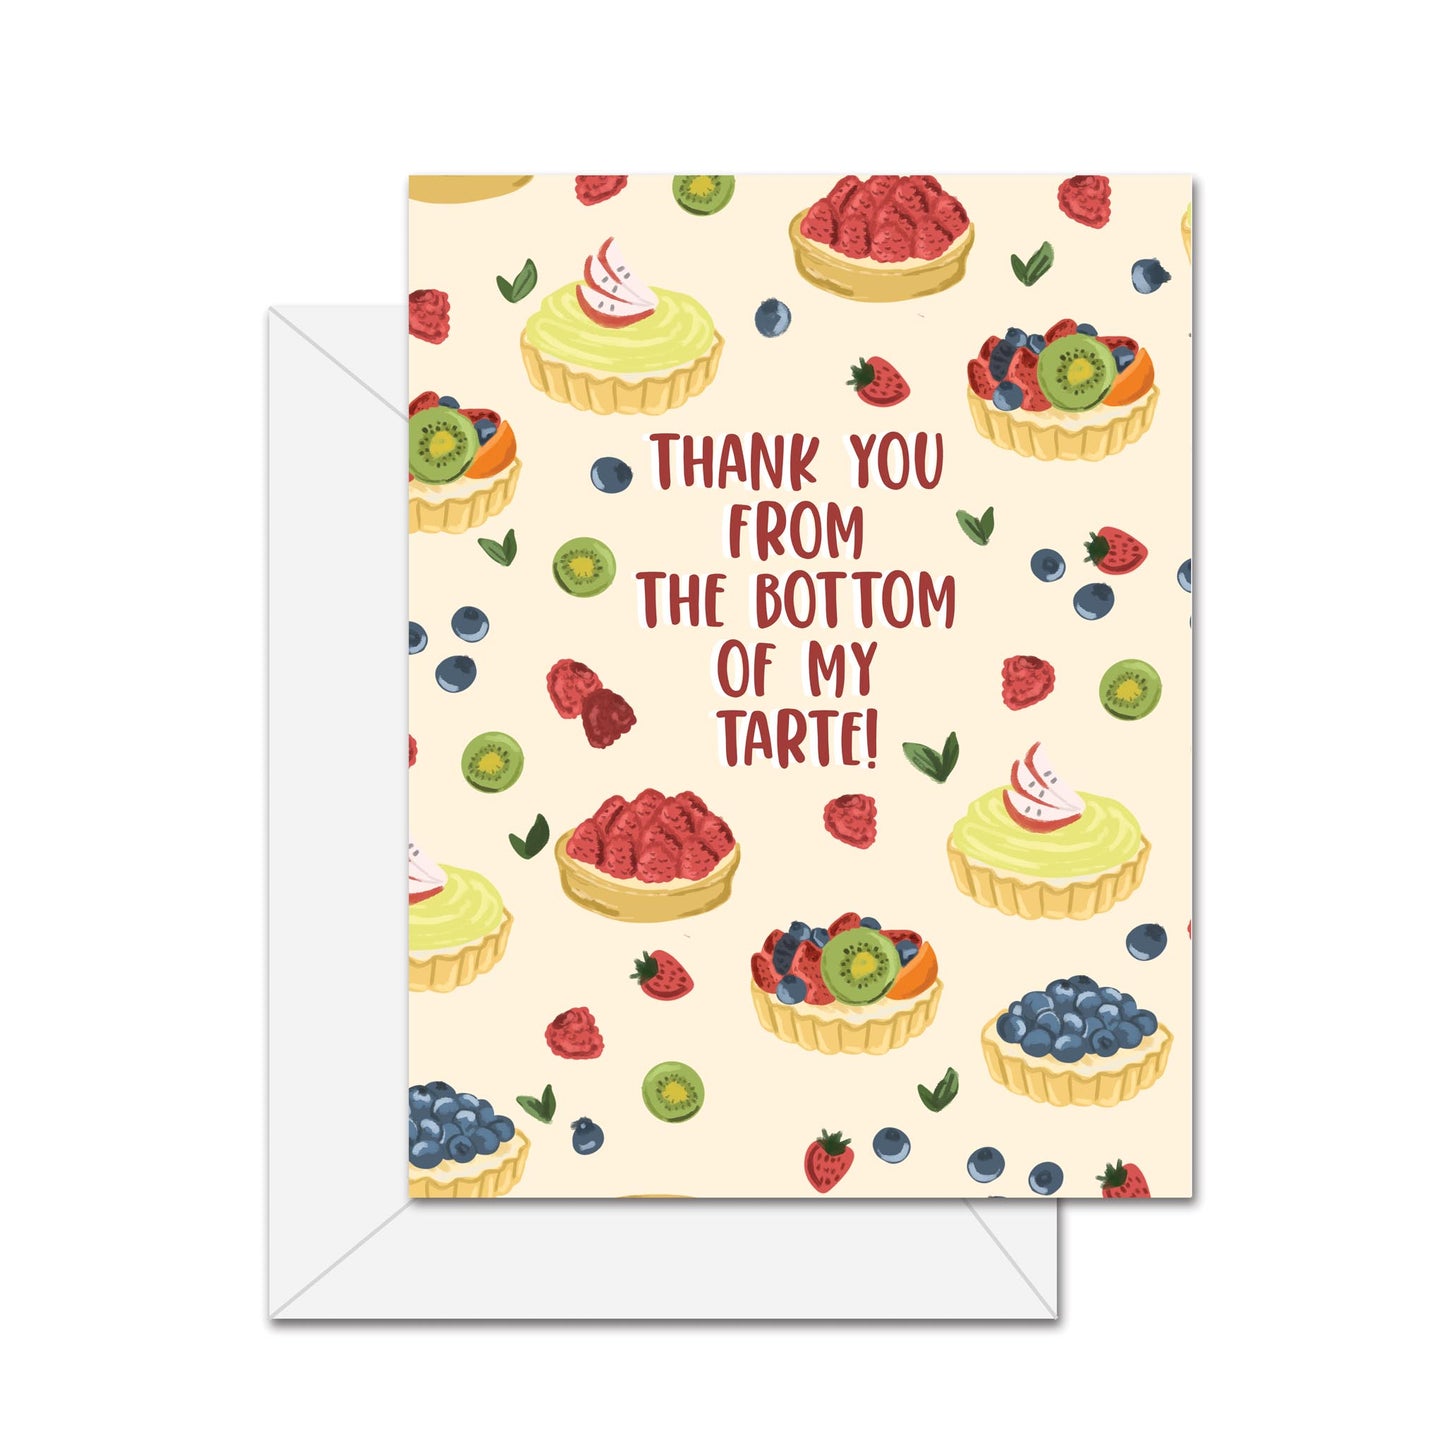 Thank You From The Bottom Of My Tarte!- Greeting Card